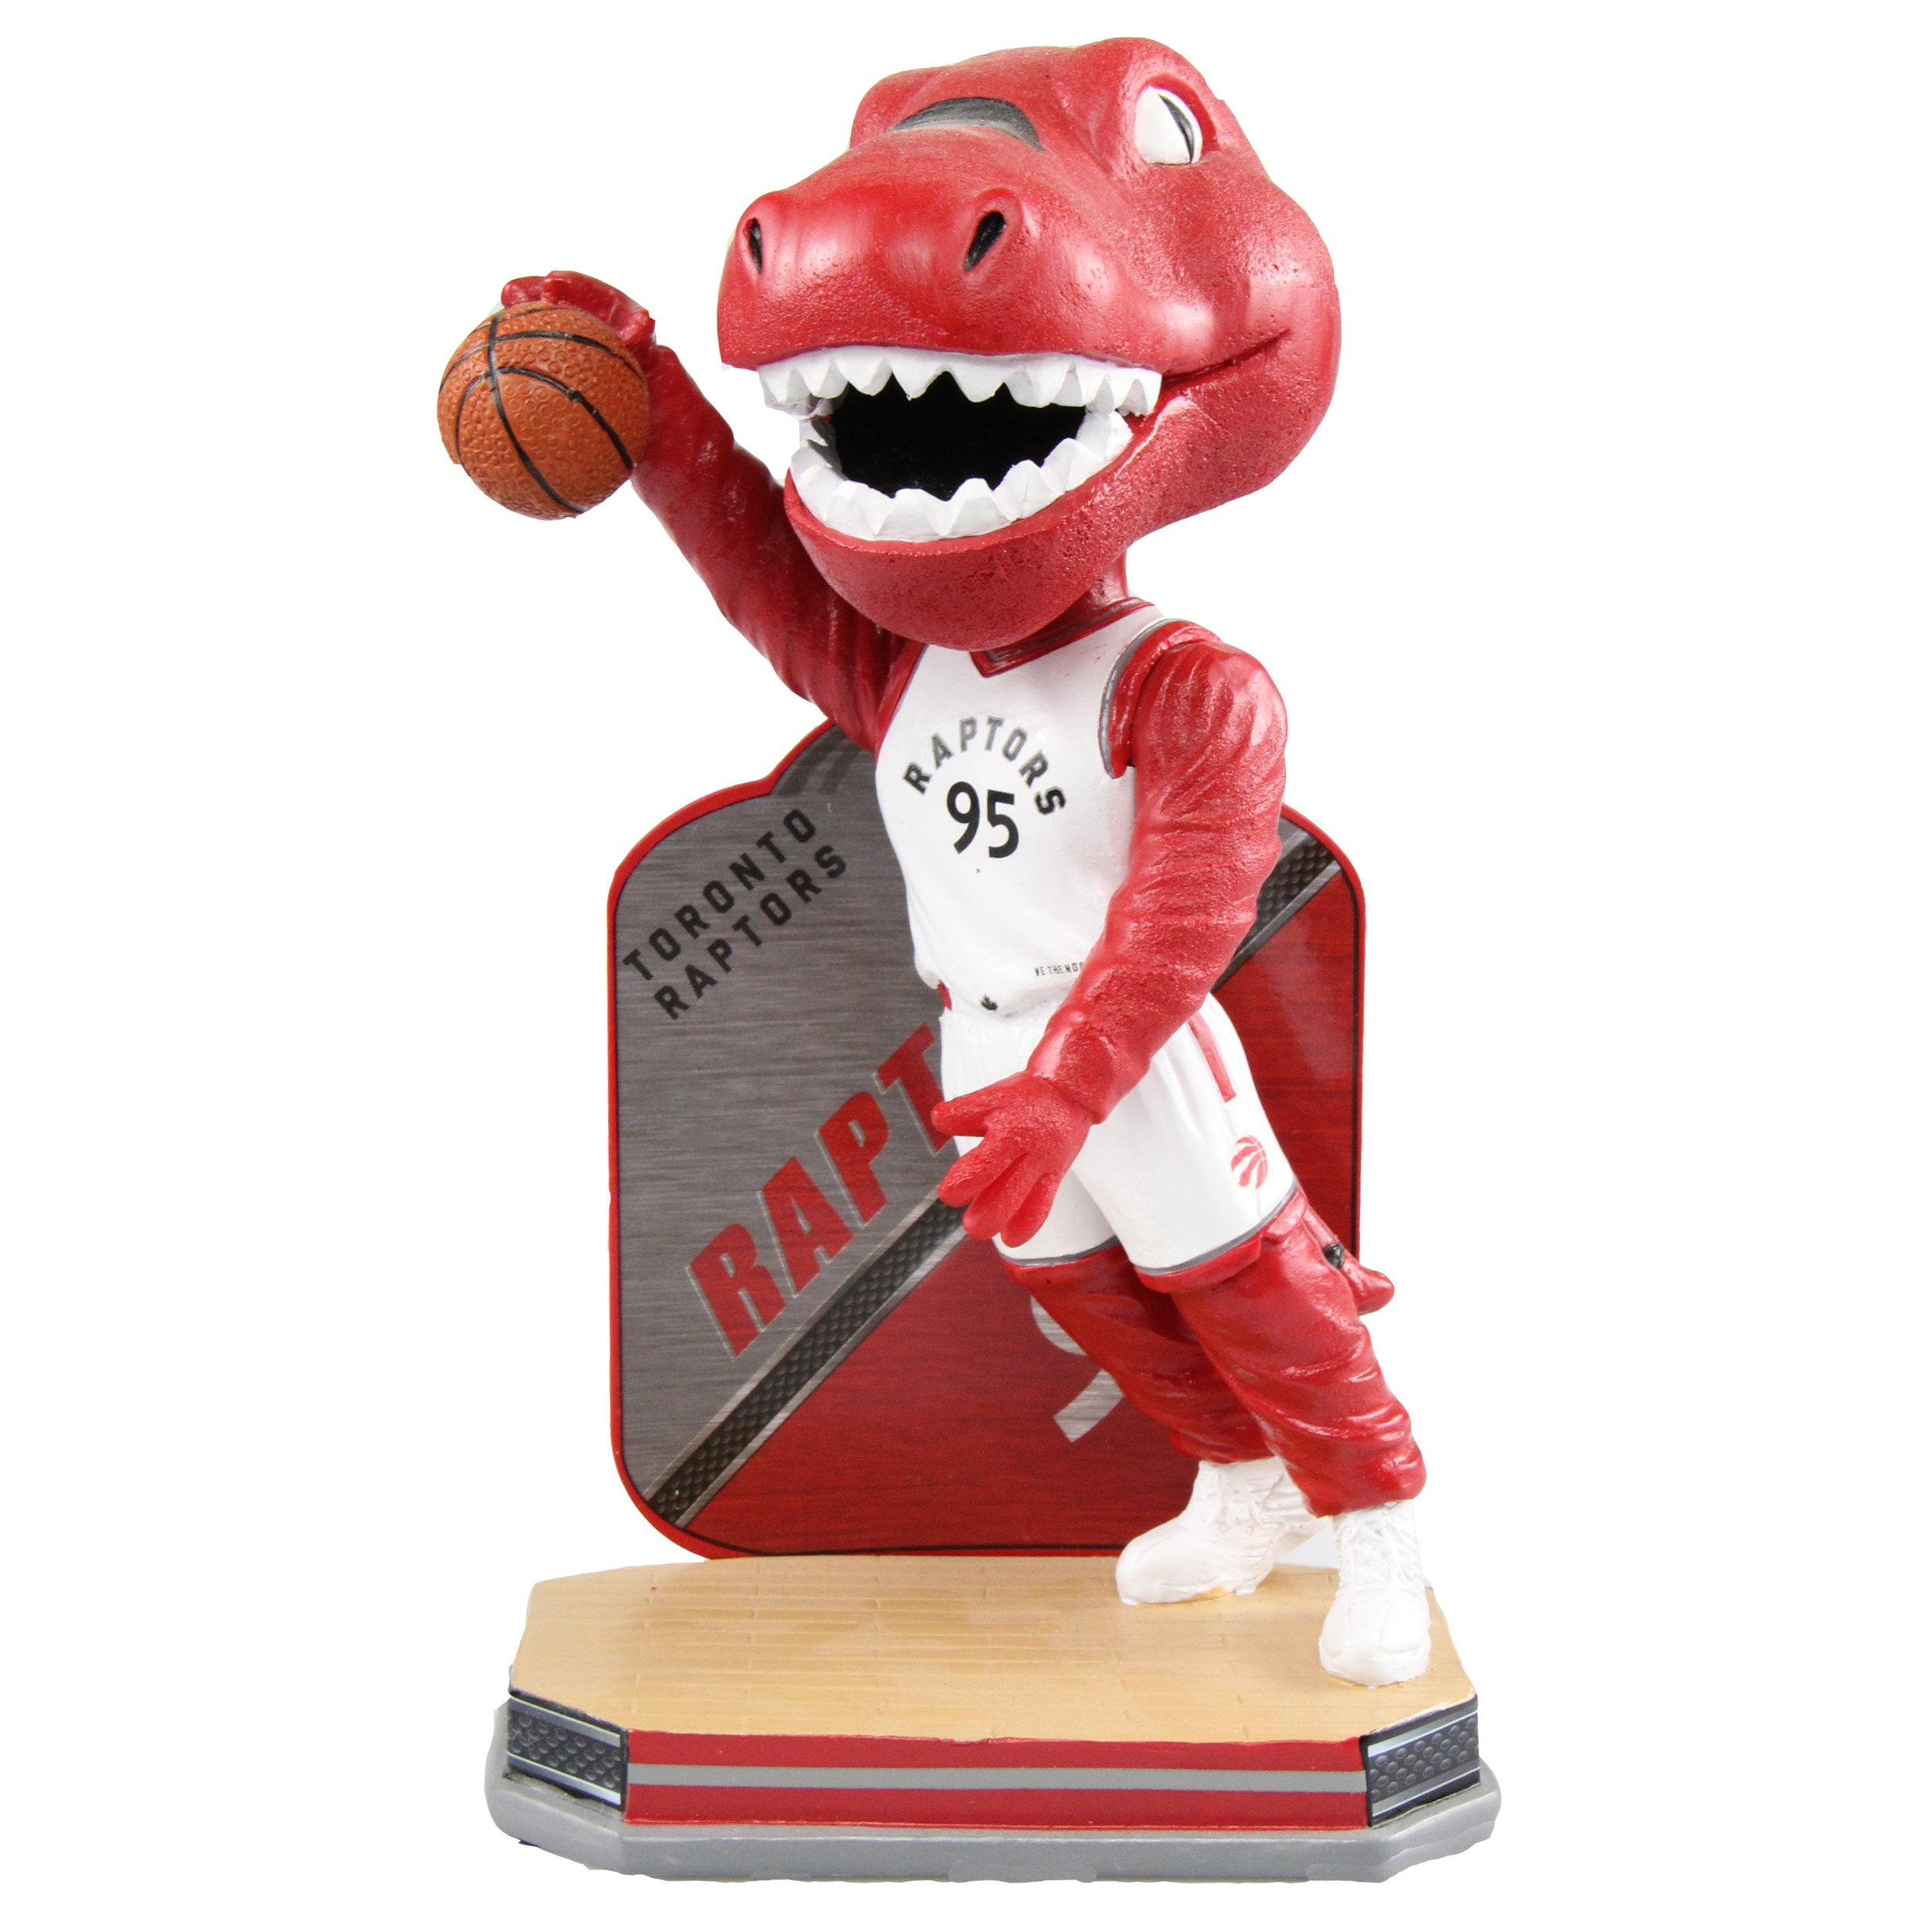 The Raptor Toronto Raptors Holiday Mascot Bobblehead Officially Licensed by NBA